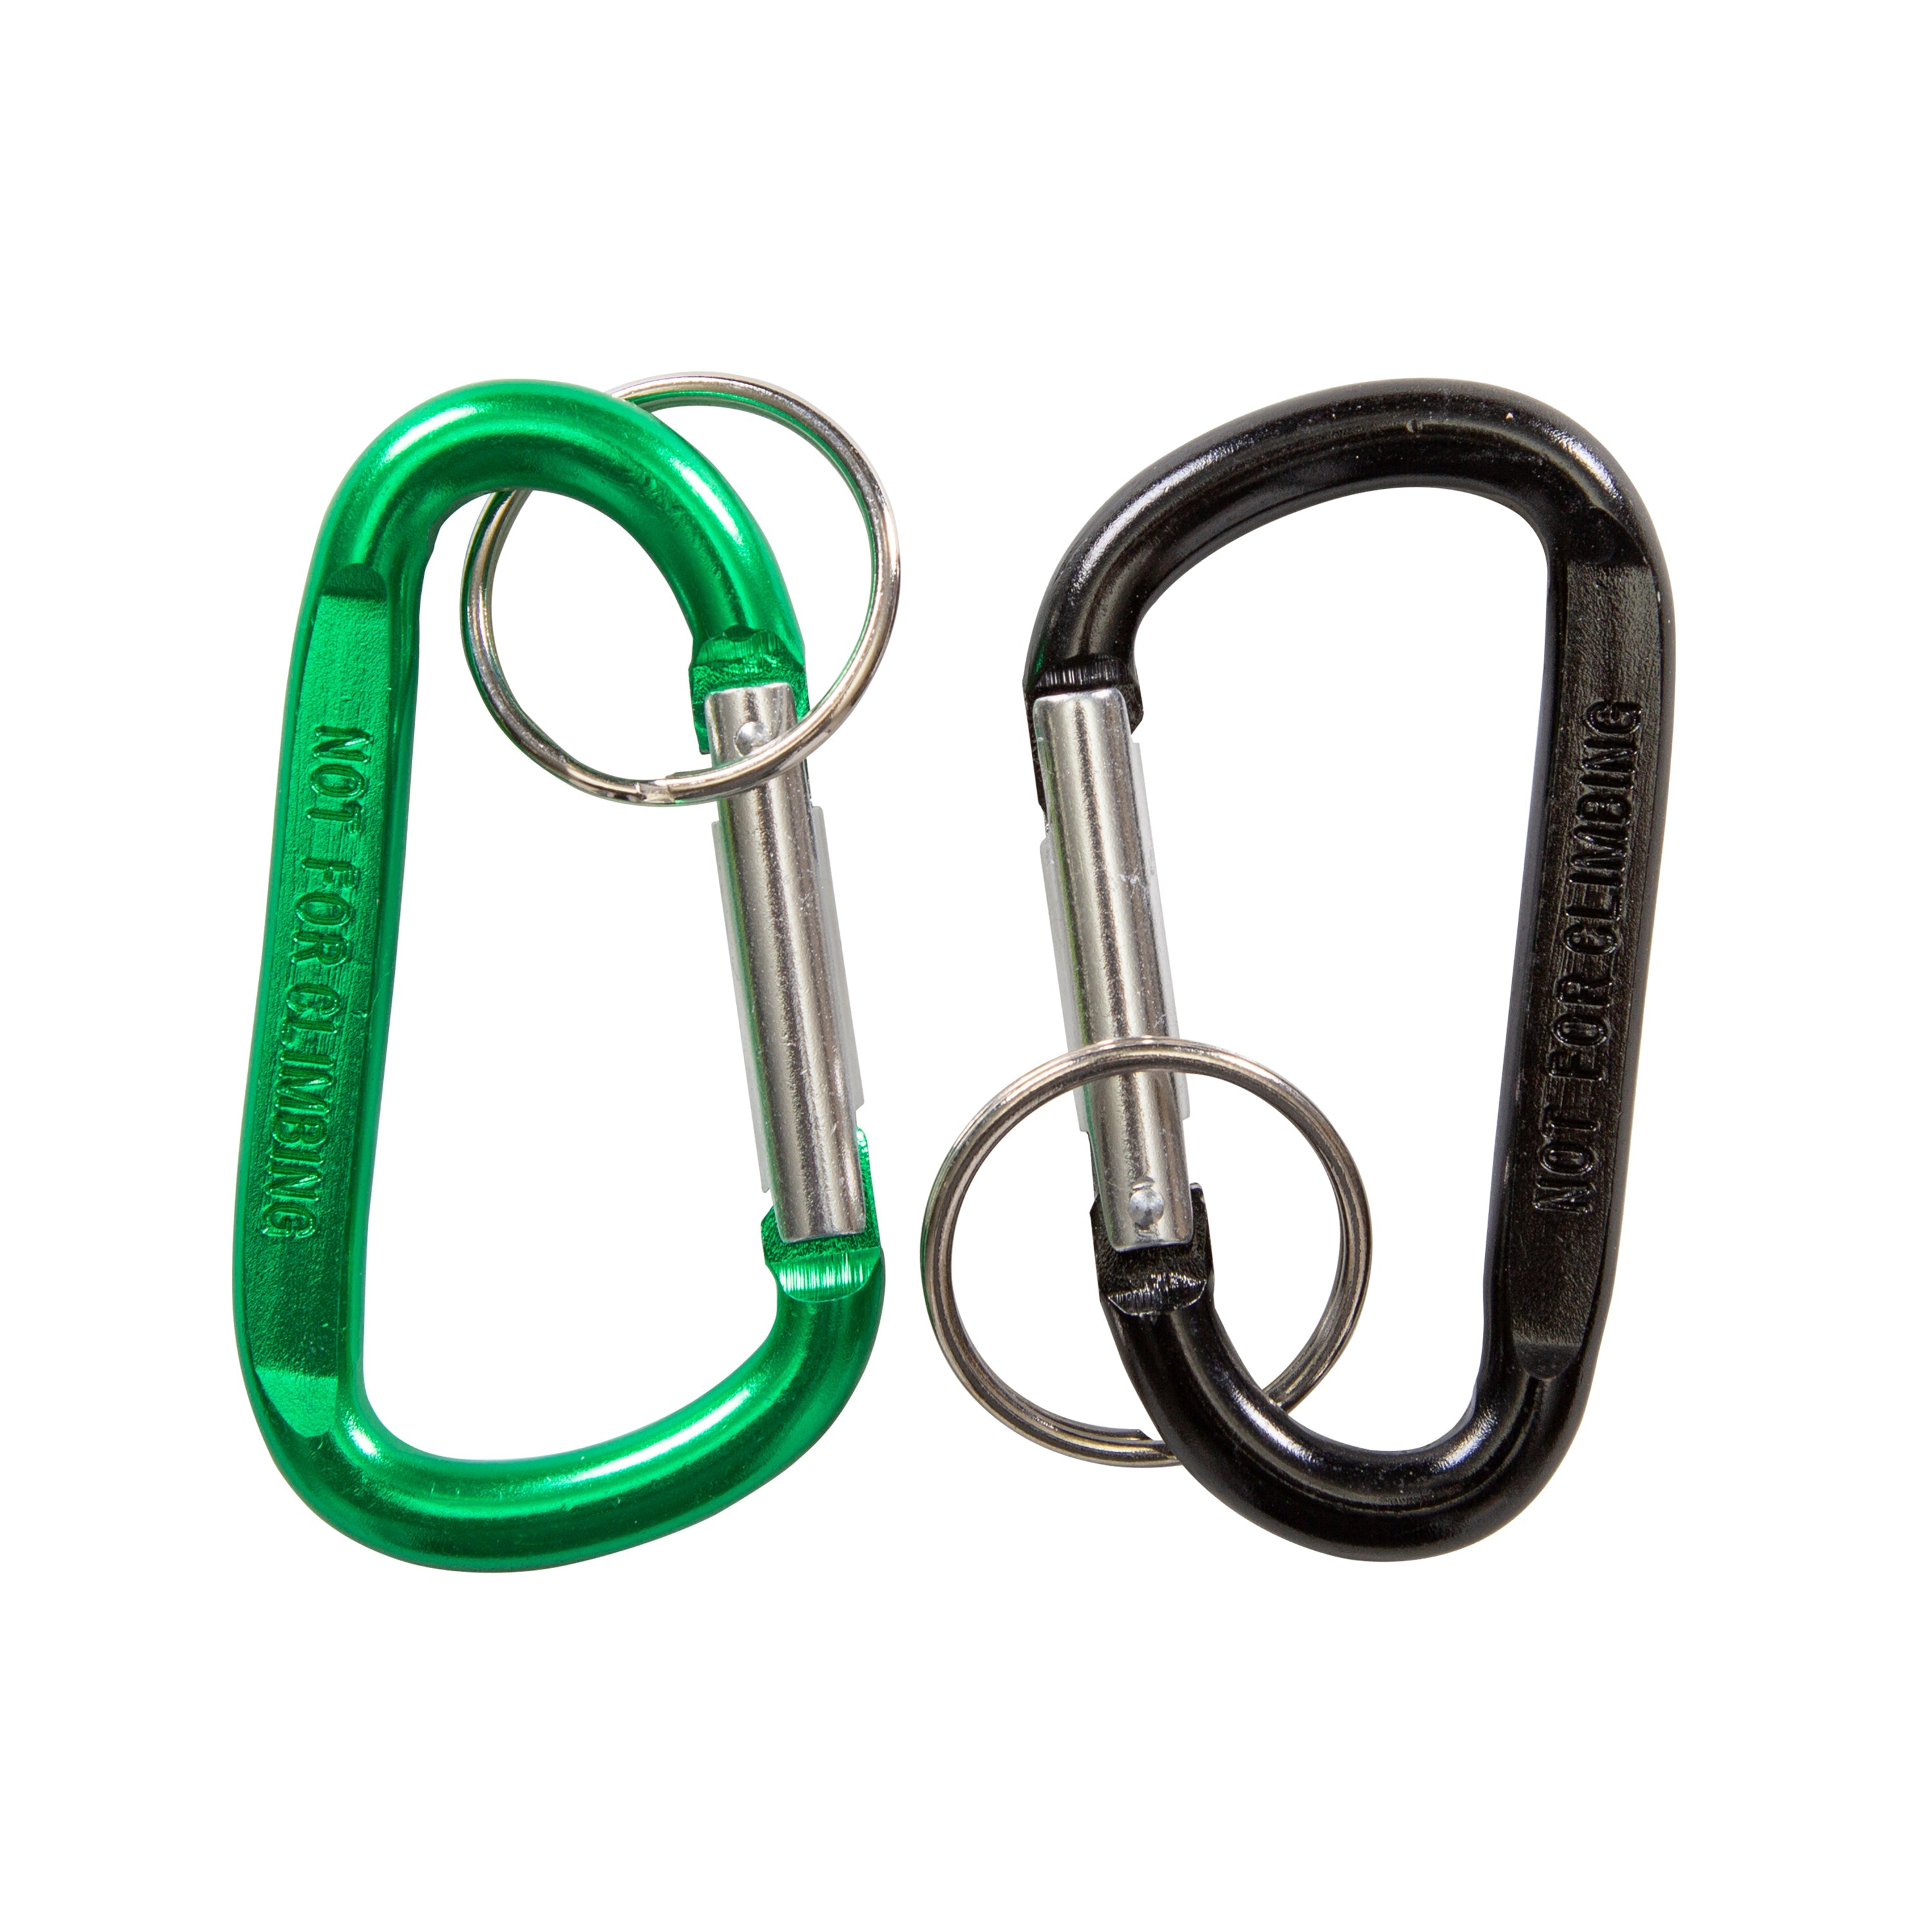 Aluminum Carabiner Not Suitable For Climbing Applications 2